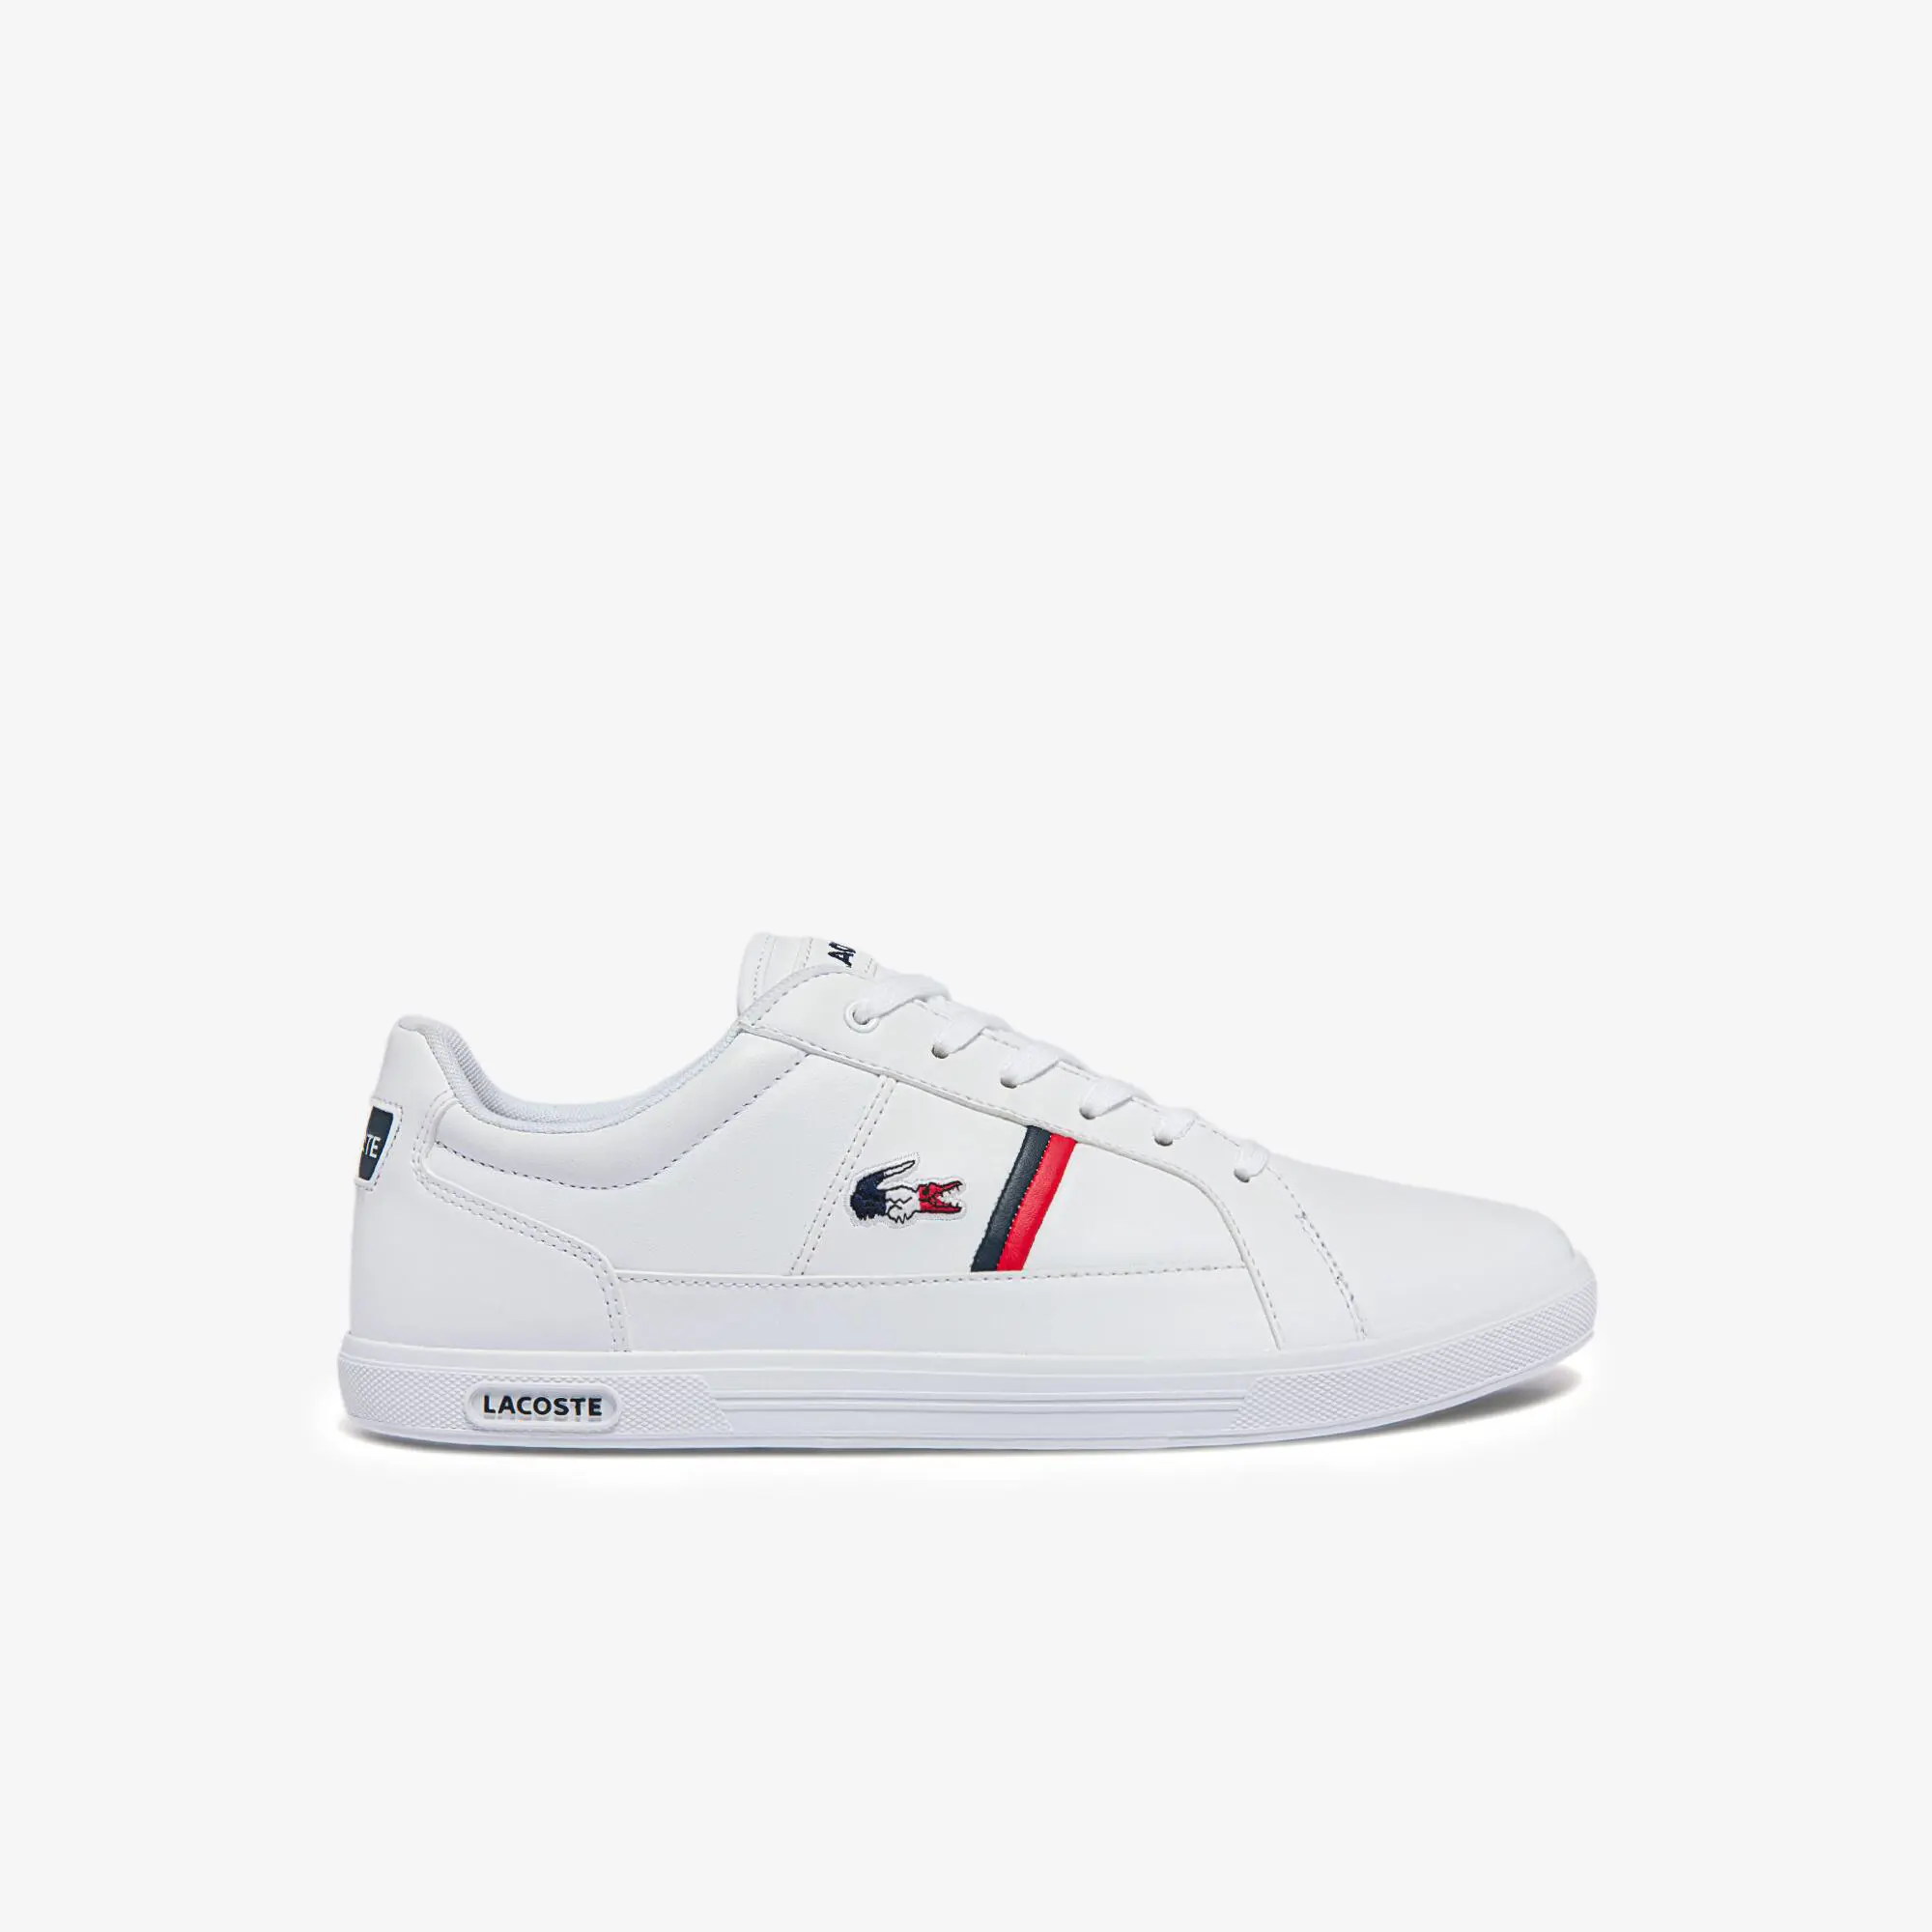 Lacoste Men's Europa Tricolore Leather and Synthetic Trainers. 1